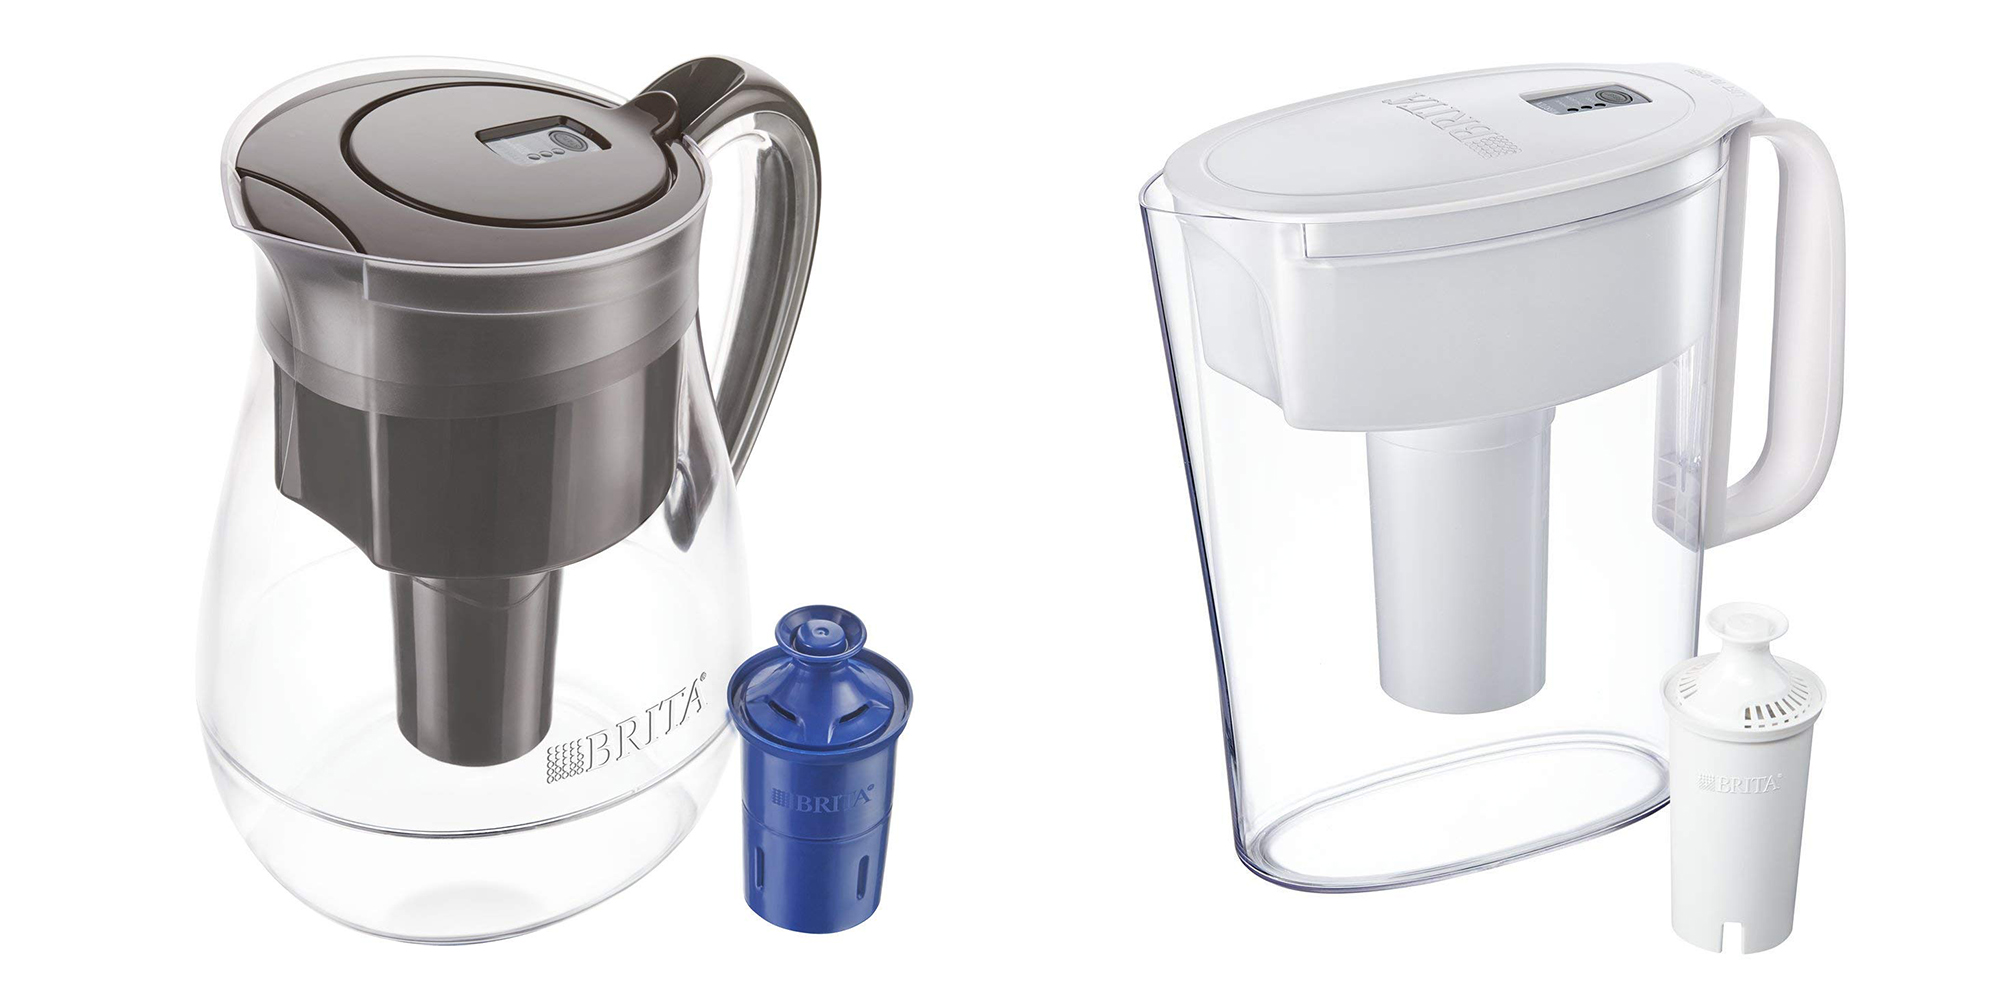 Filter your water with this Amazon Brita Gold Box, deals start at $13.50